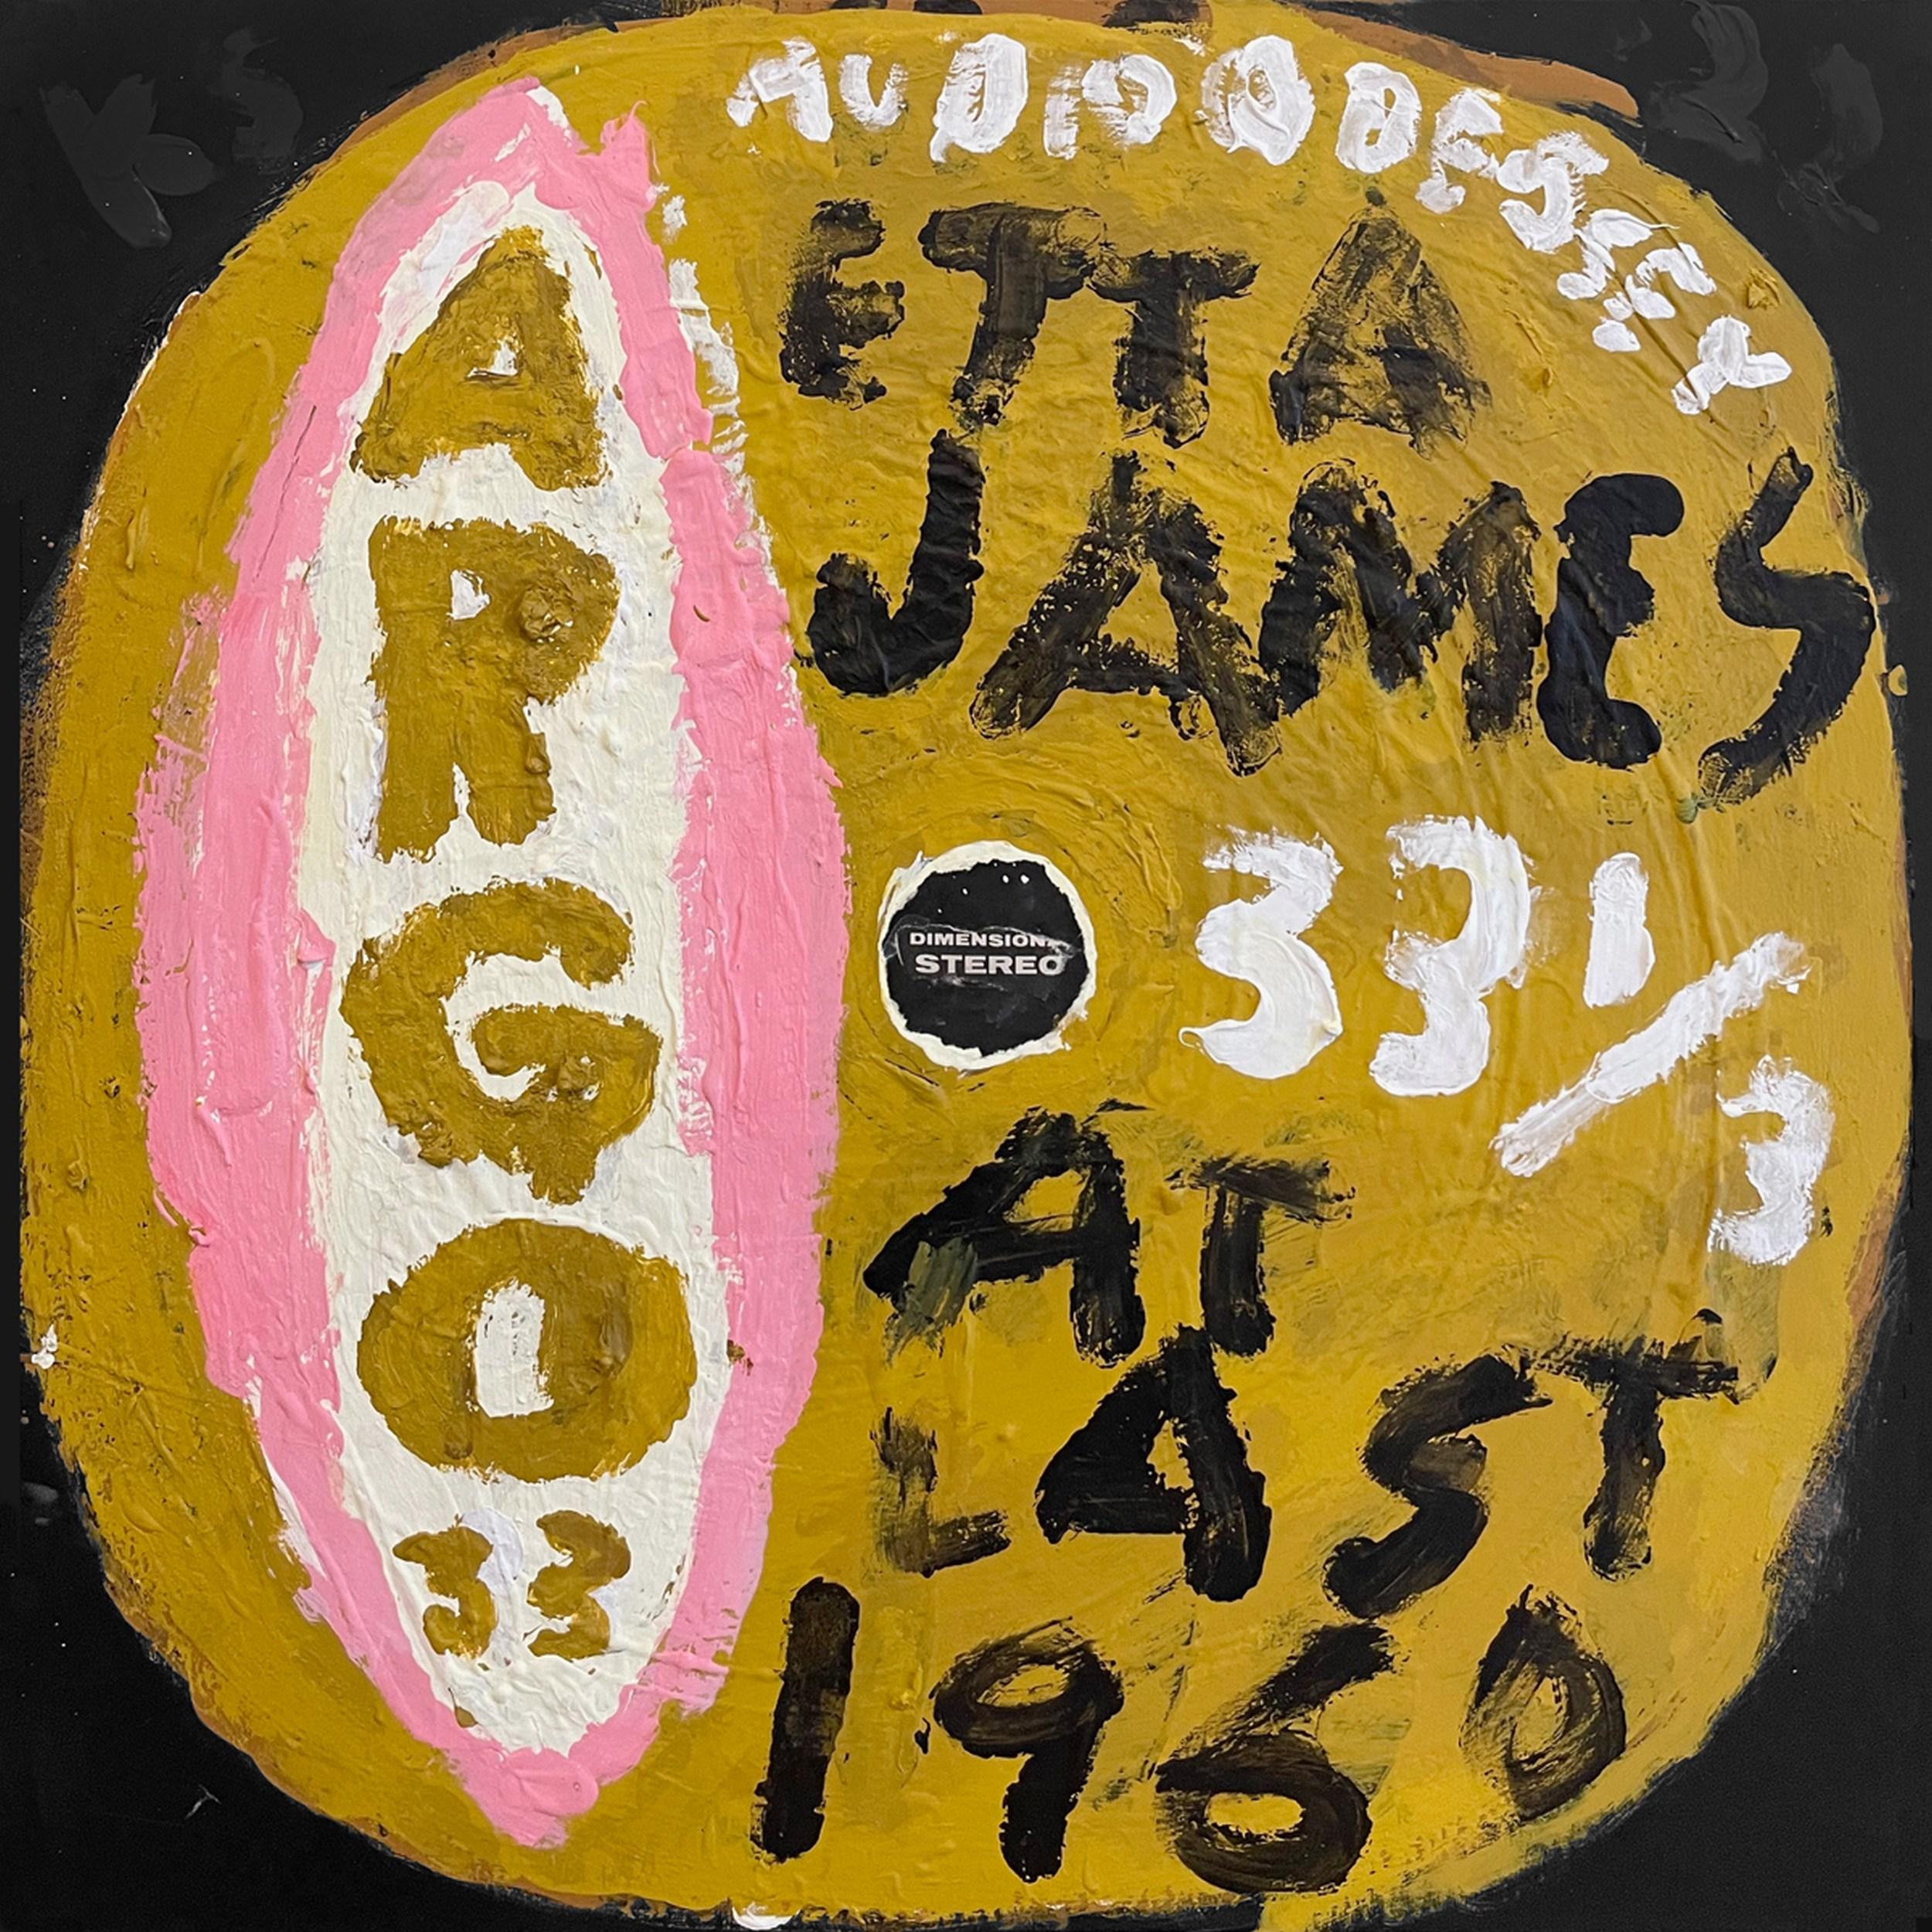 Kerry Smith Abstract Painting - Etta James - At Last (Grammy, Album Art, Iconic, Music, Rock and Roll)